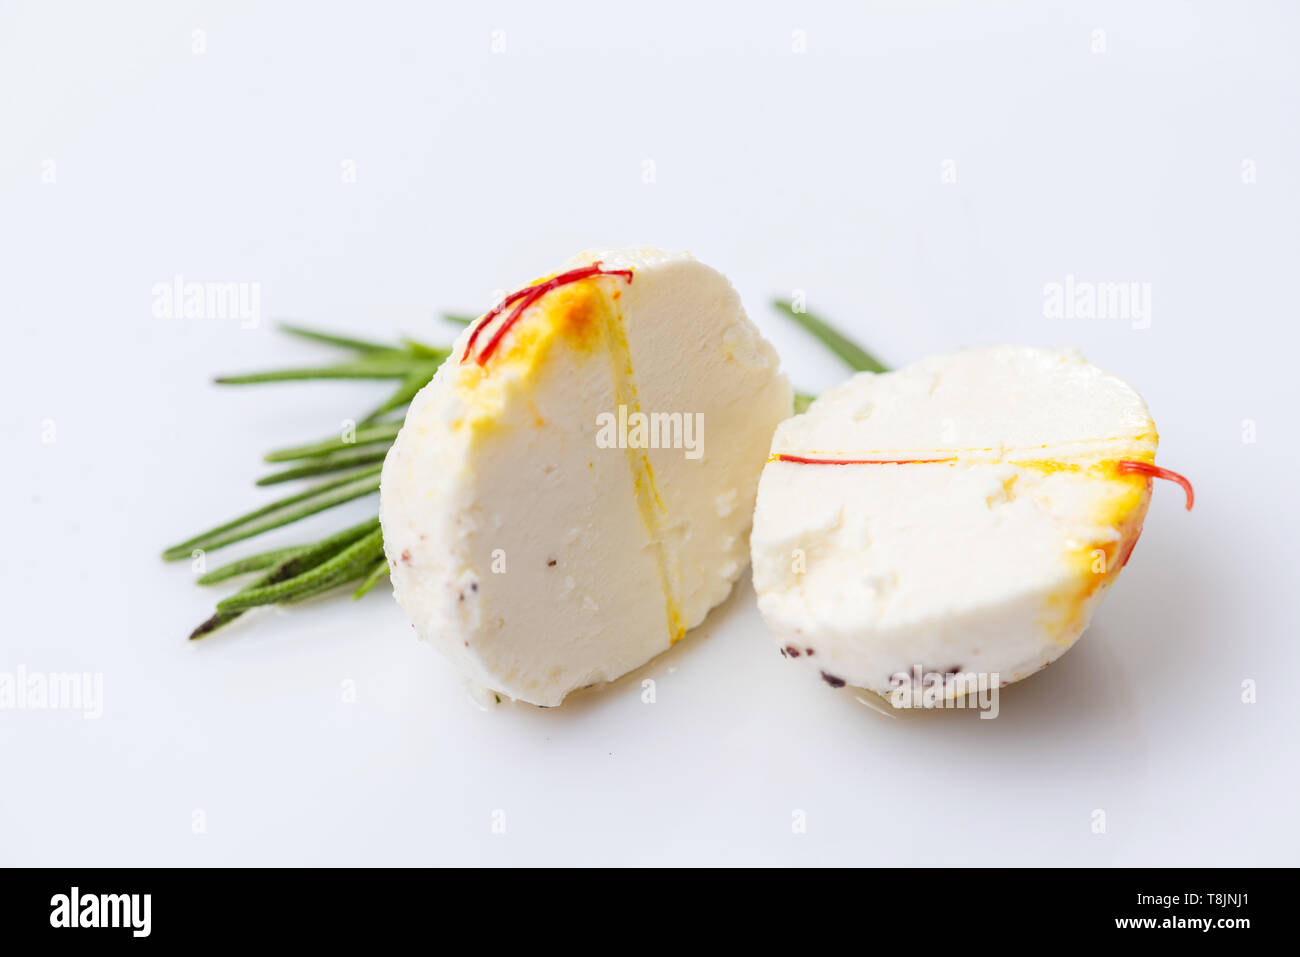 Two halves of cheese ball with sprig of thyme on white background. Stock Photo